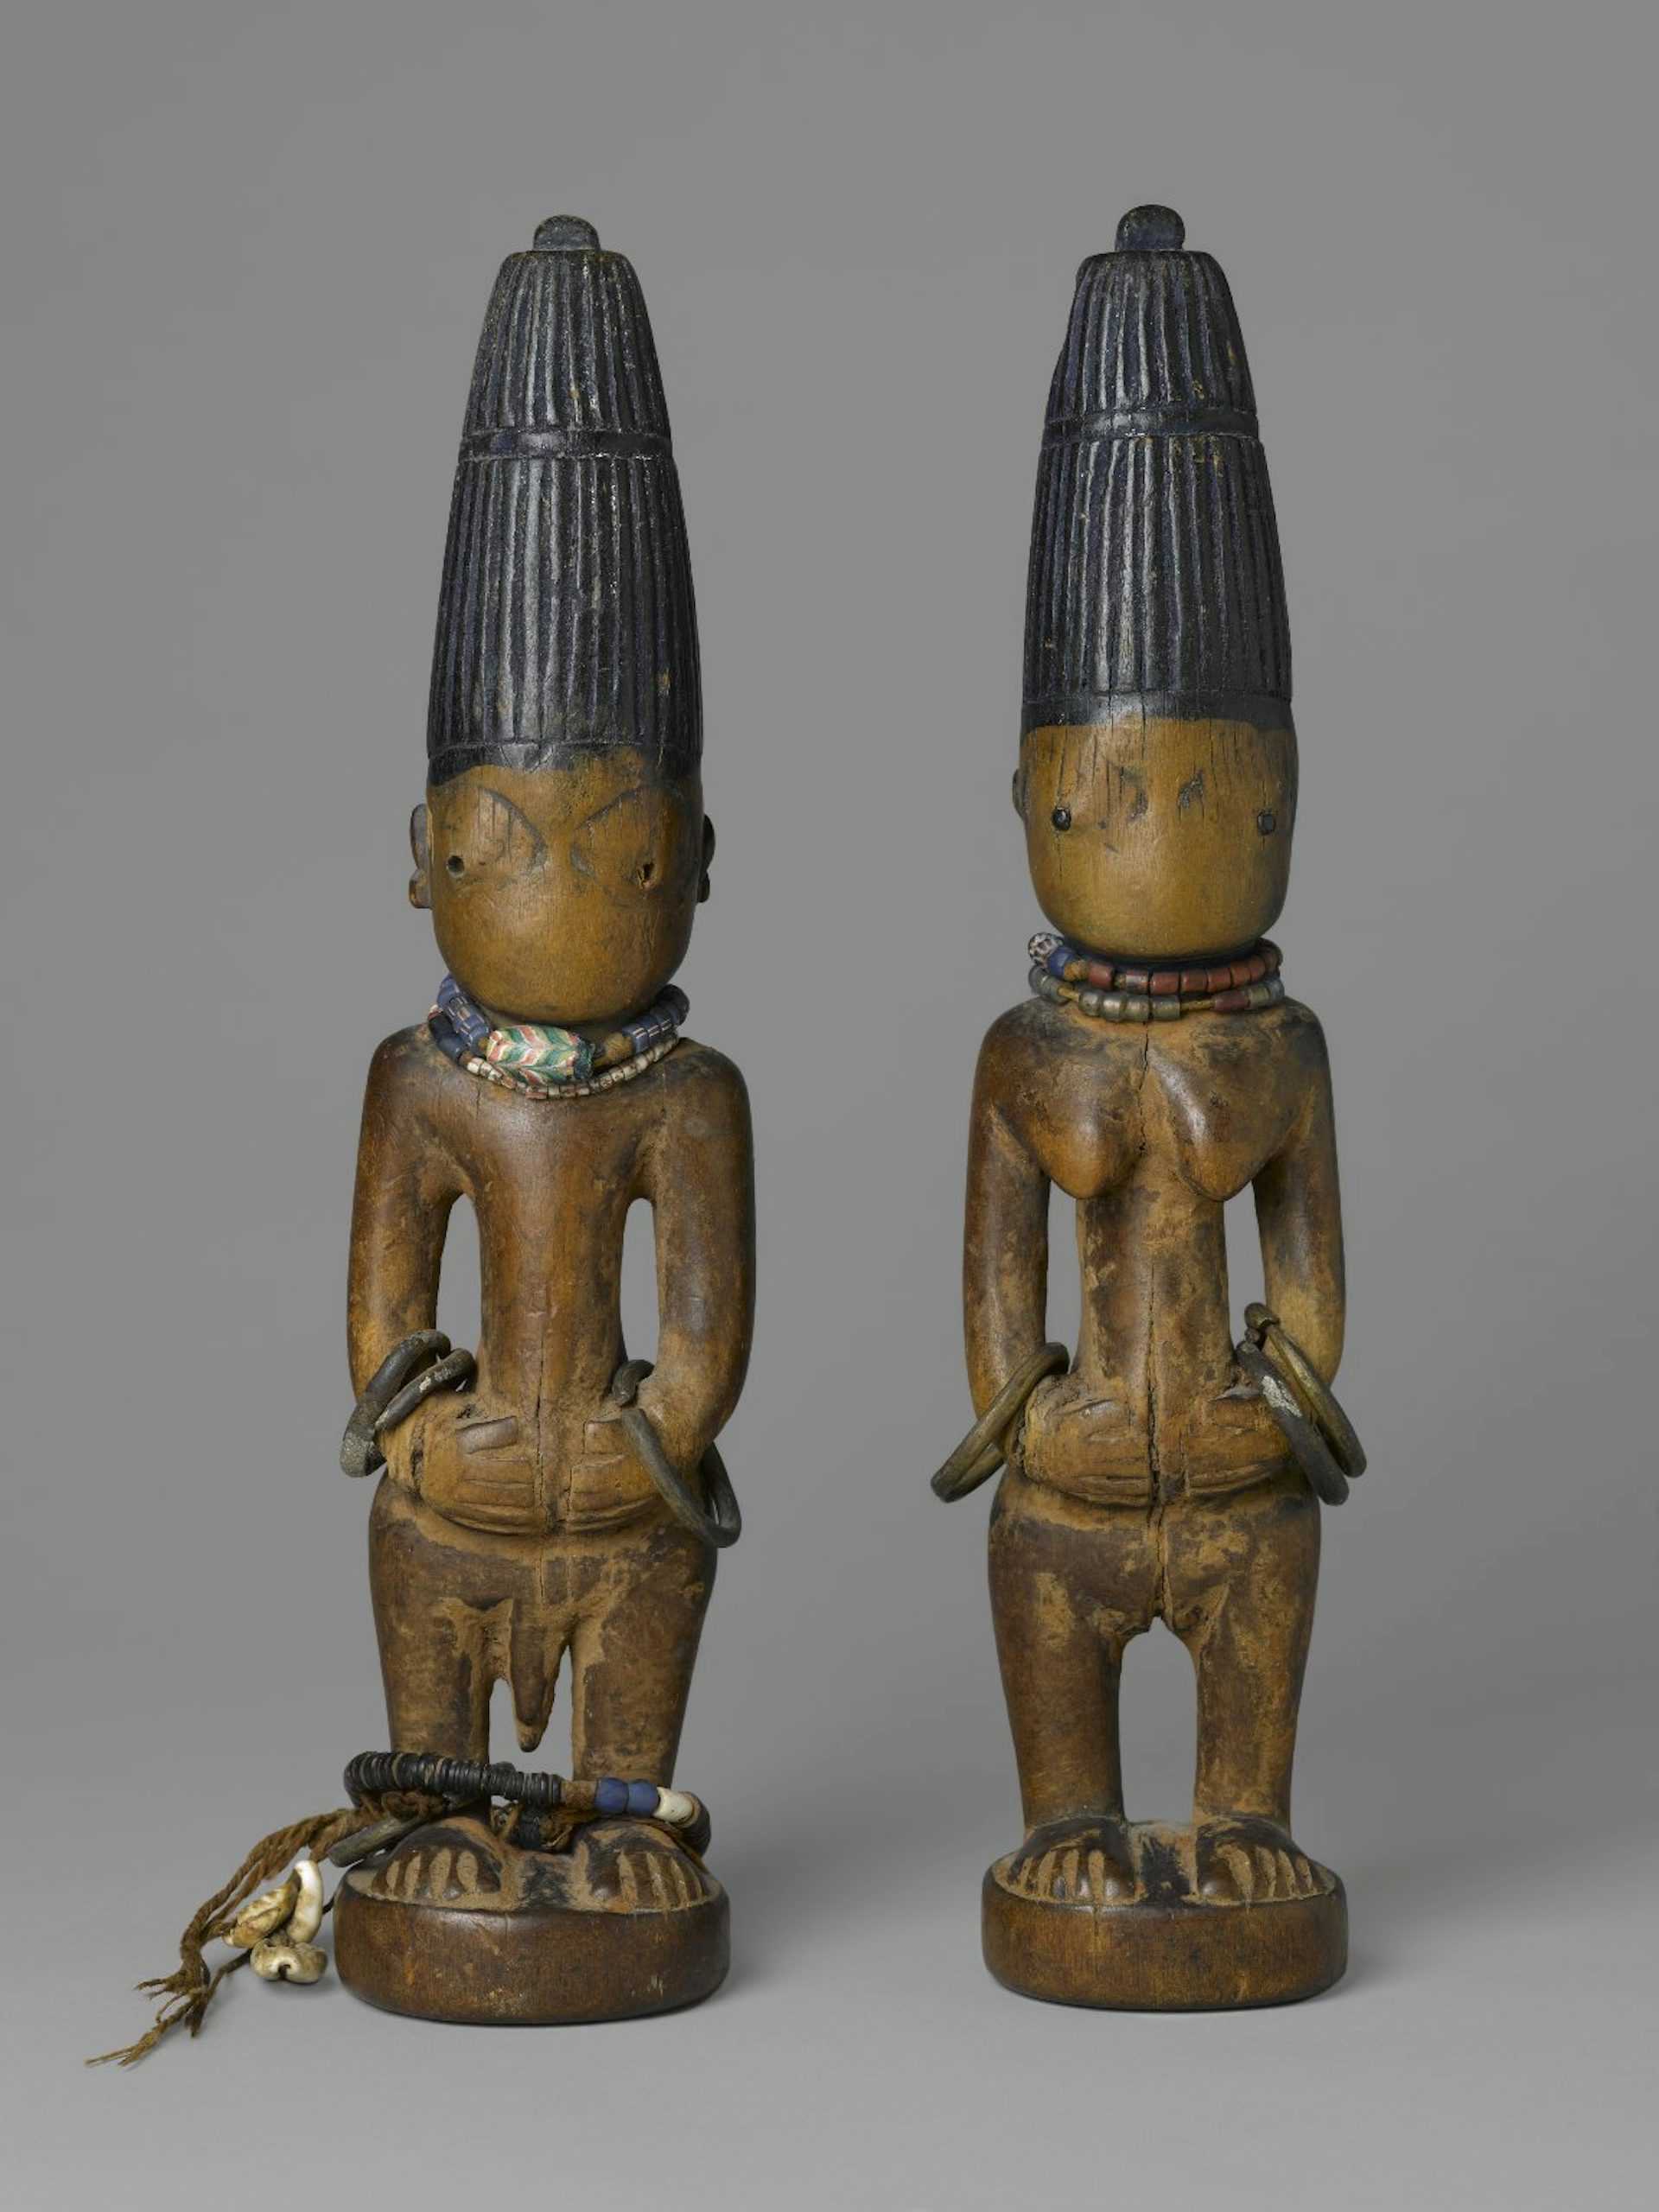 Pair of twin figures (Ère Ìbejì) by Yoruba artist (late 19th-early 20th century)